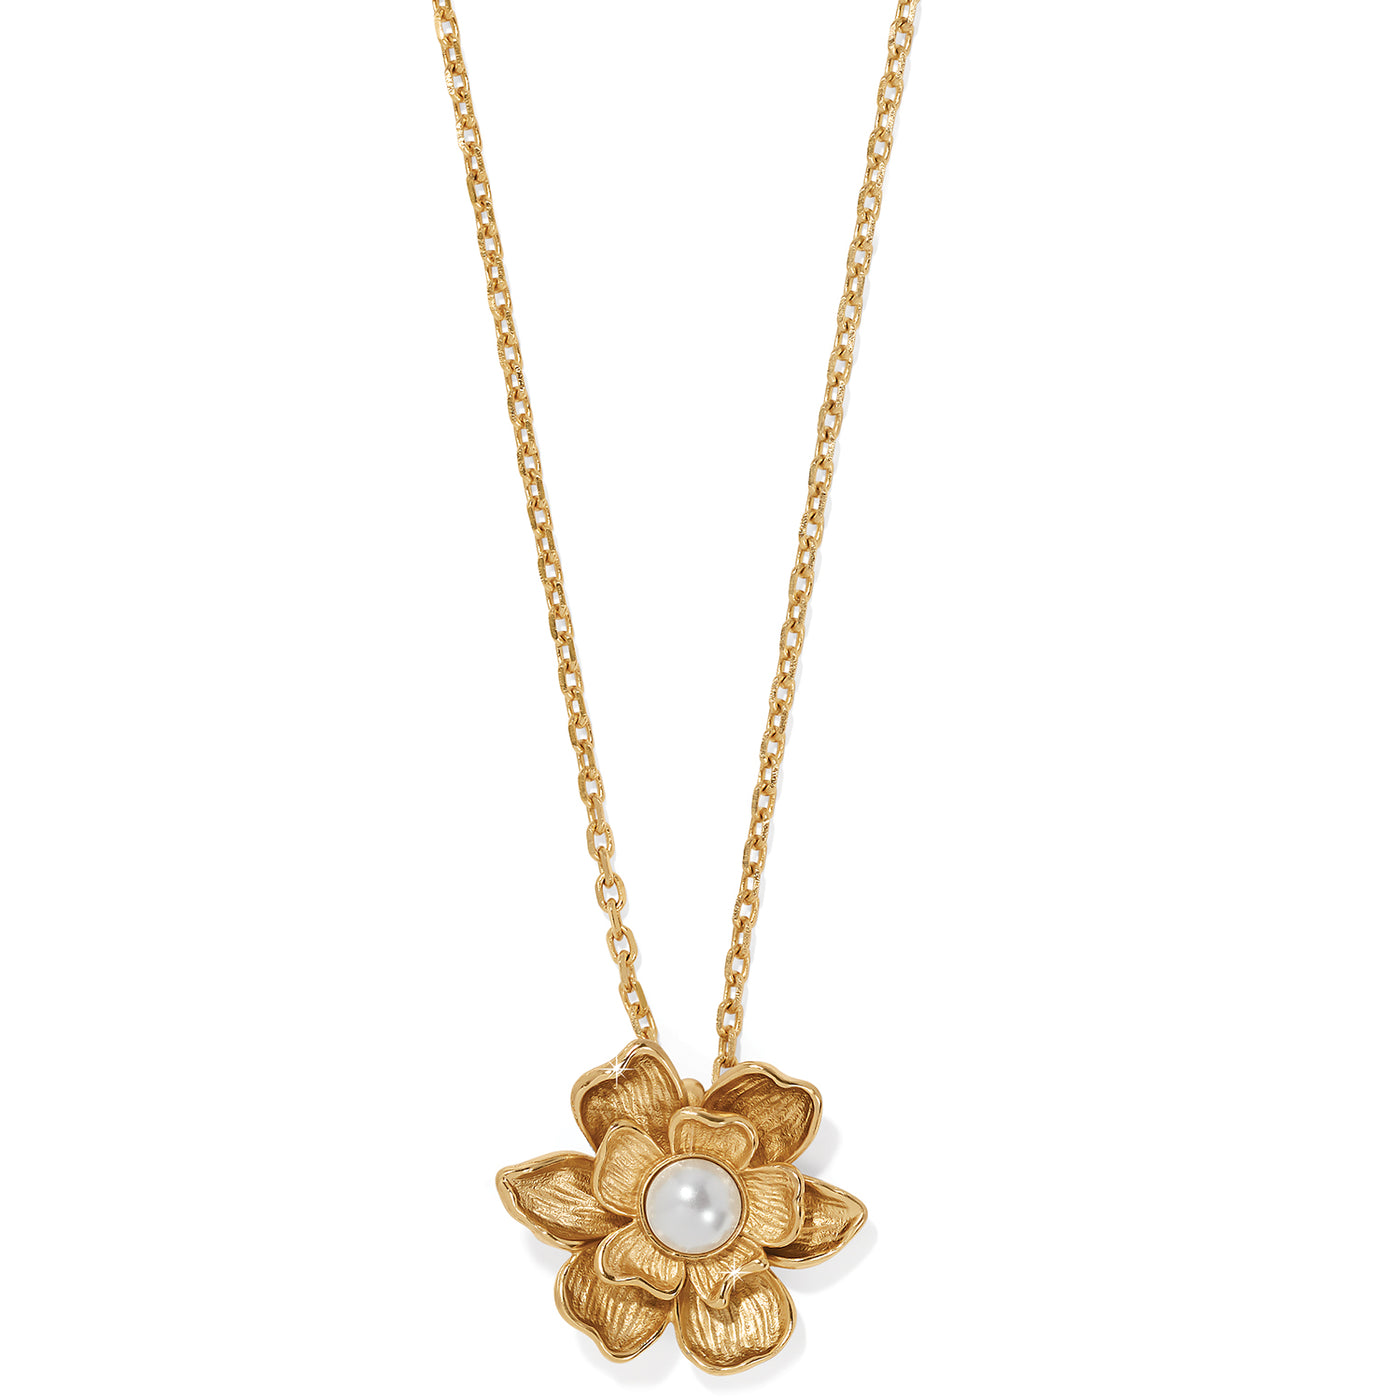 EVERBLOOM PEARL FLOWER NECKLACE